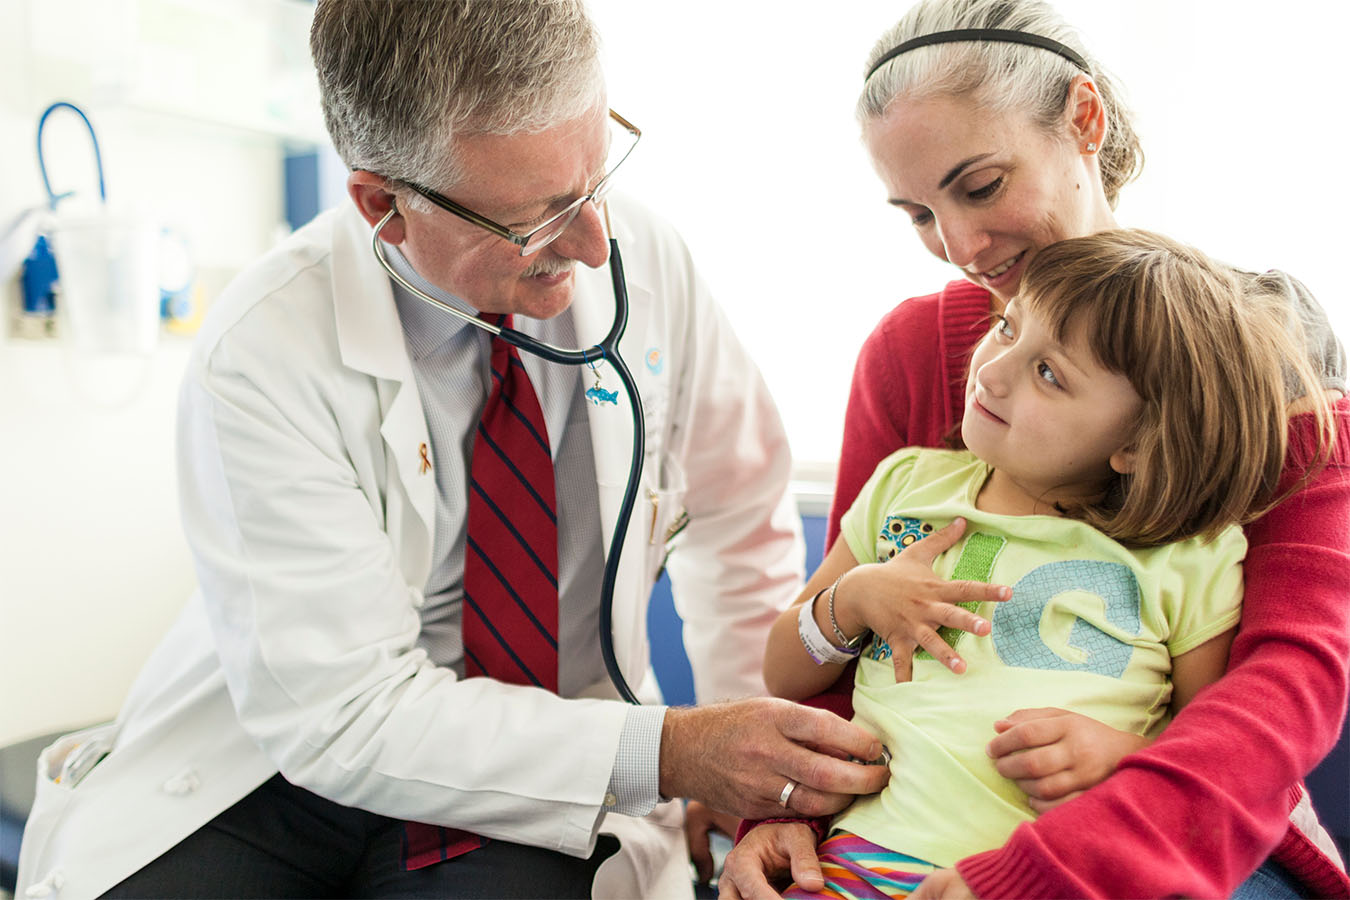 A doctor uses a stethoscope to listen to a child’s belly while a caregiver holds the child on their lap.